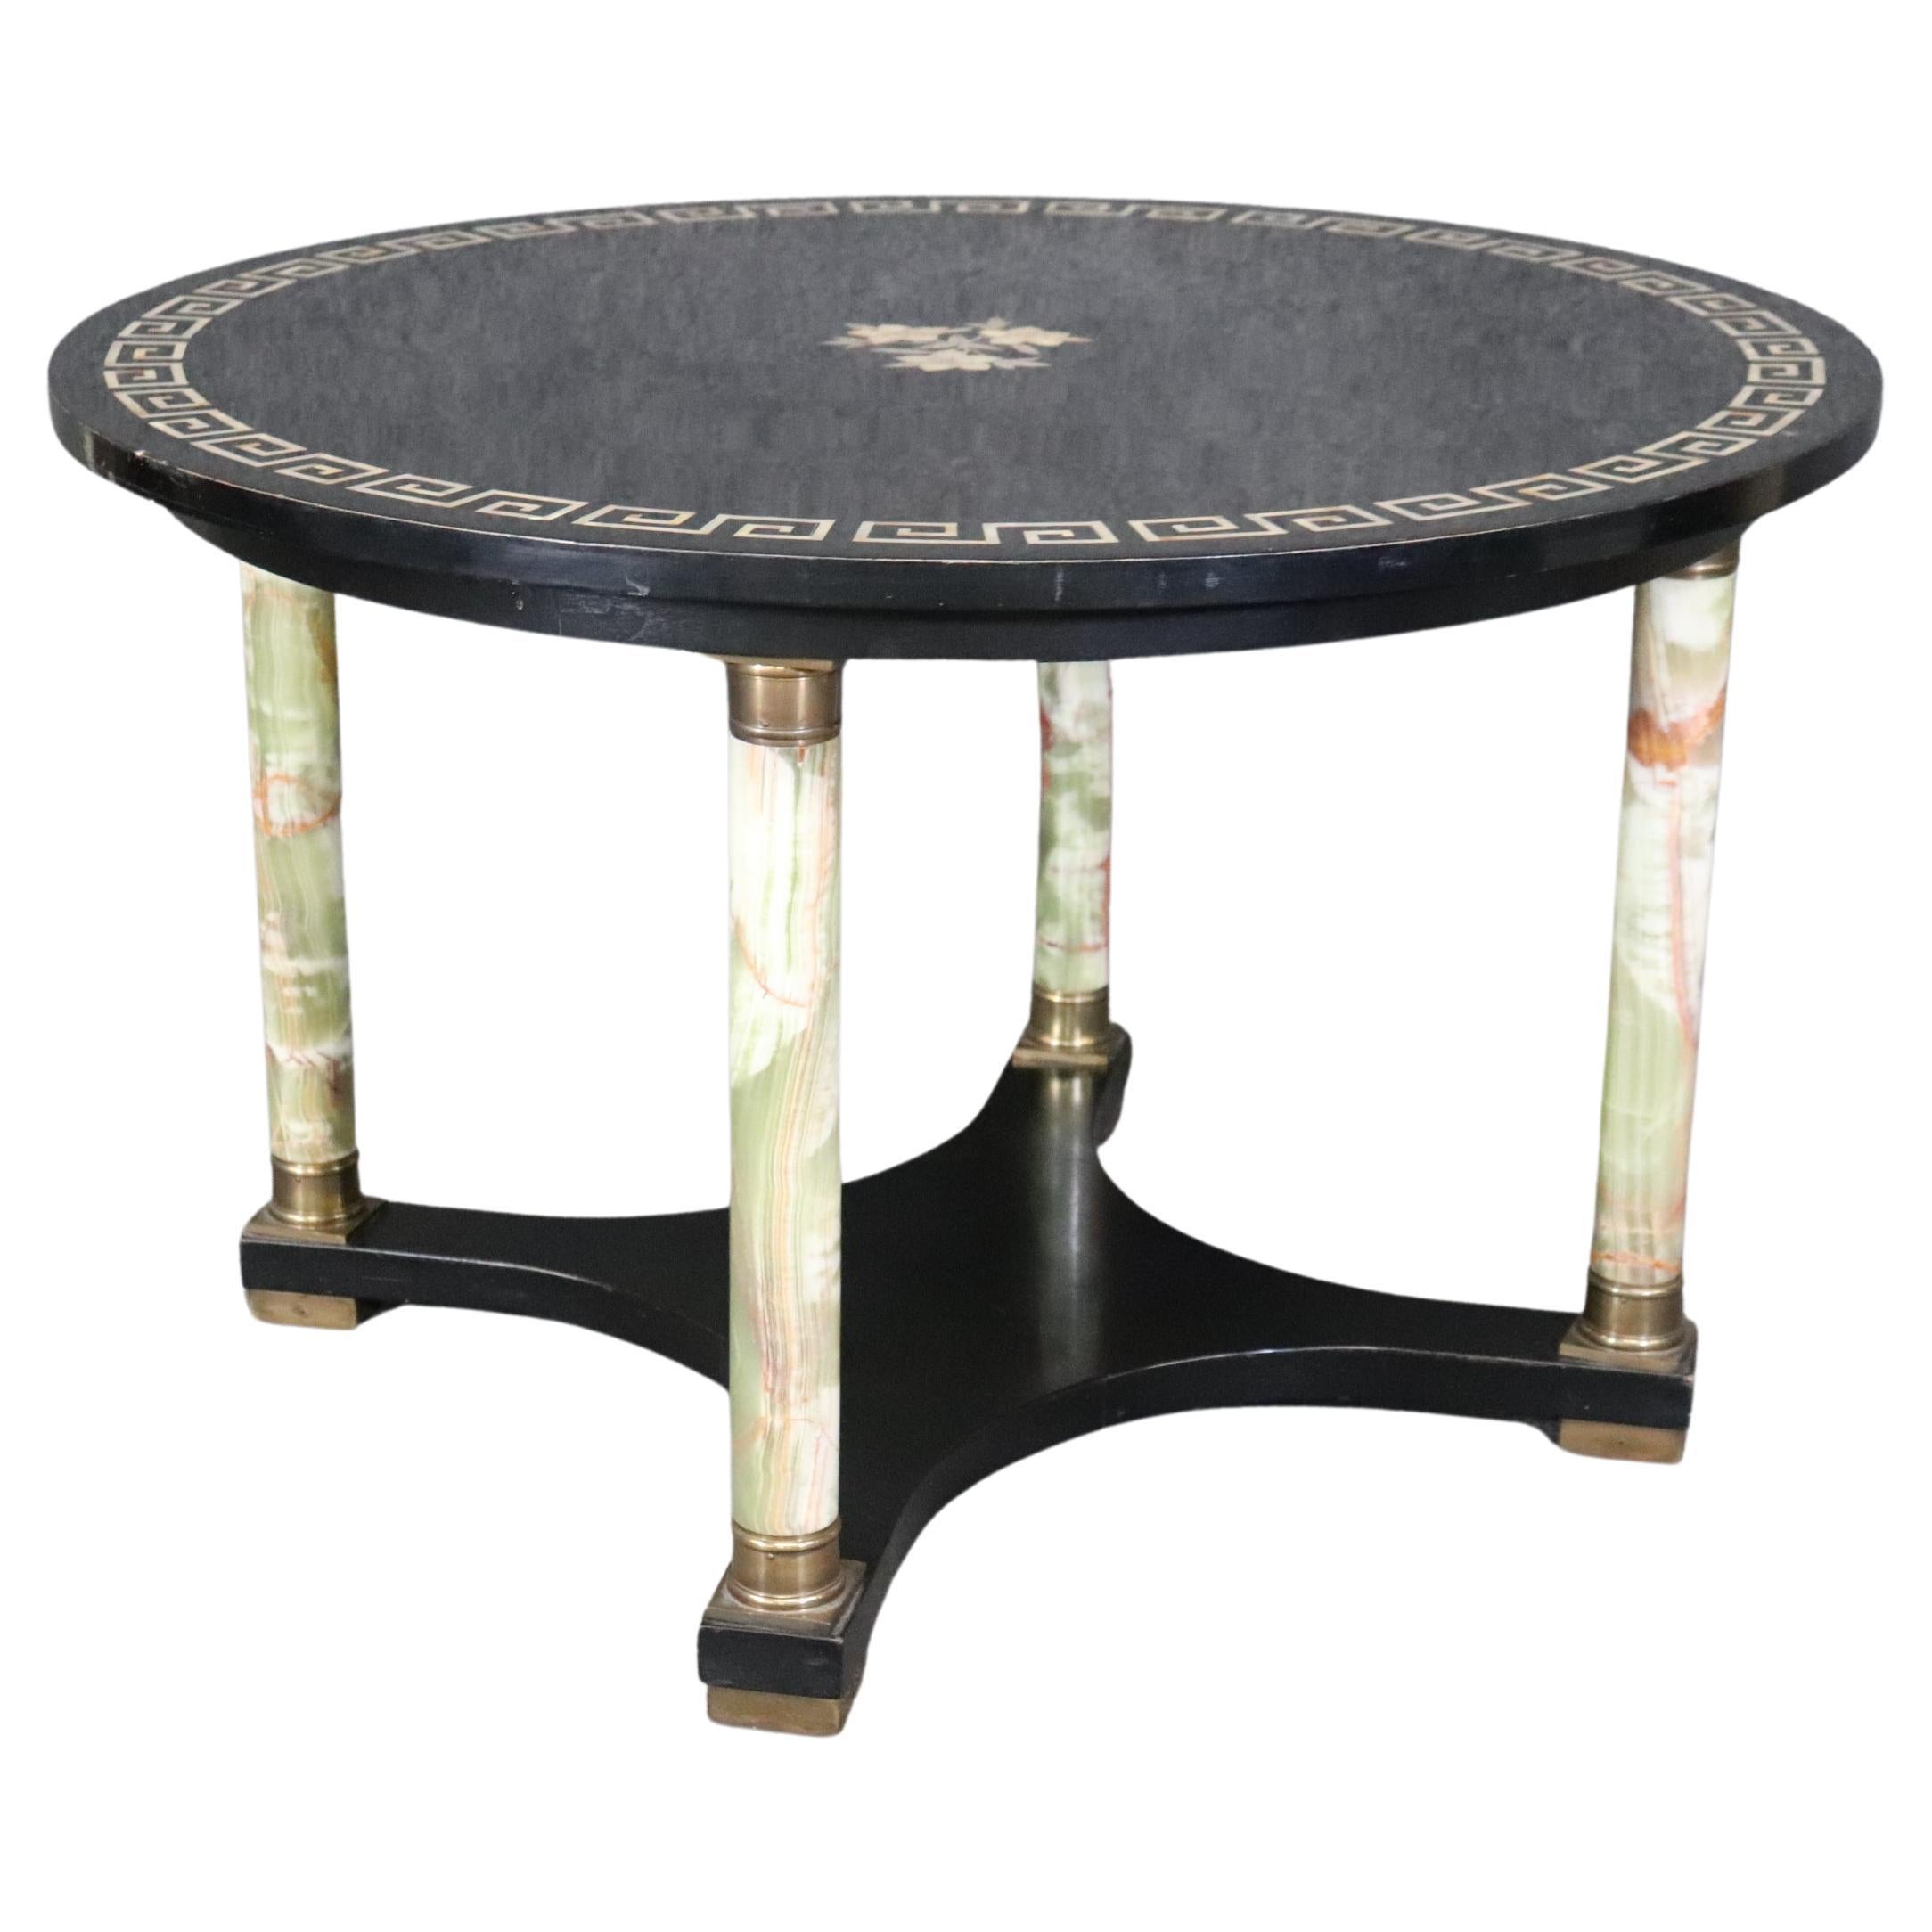 Italian Neoclassical Green Onyx and Mother of Pearl Inlaid Center Table  For Sale